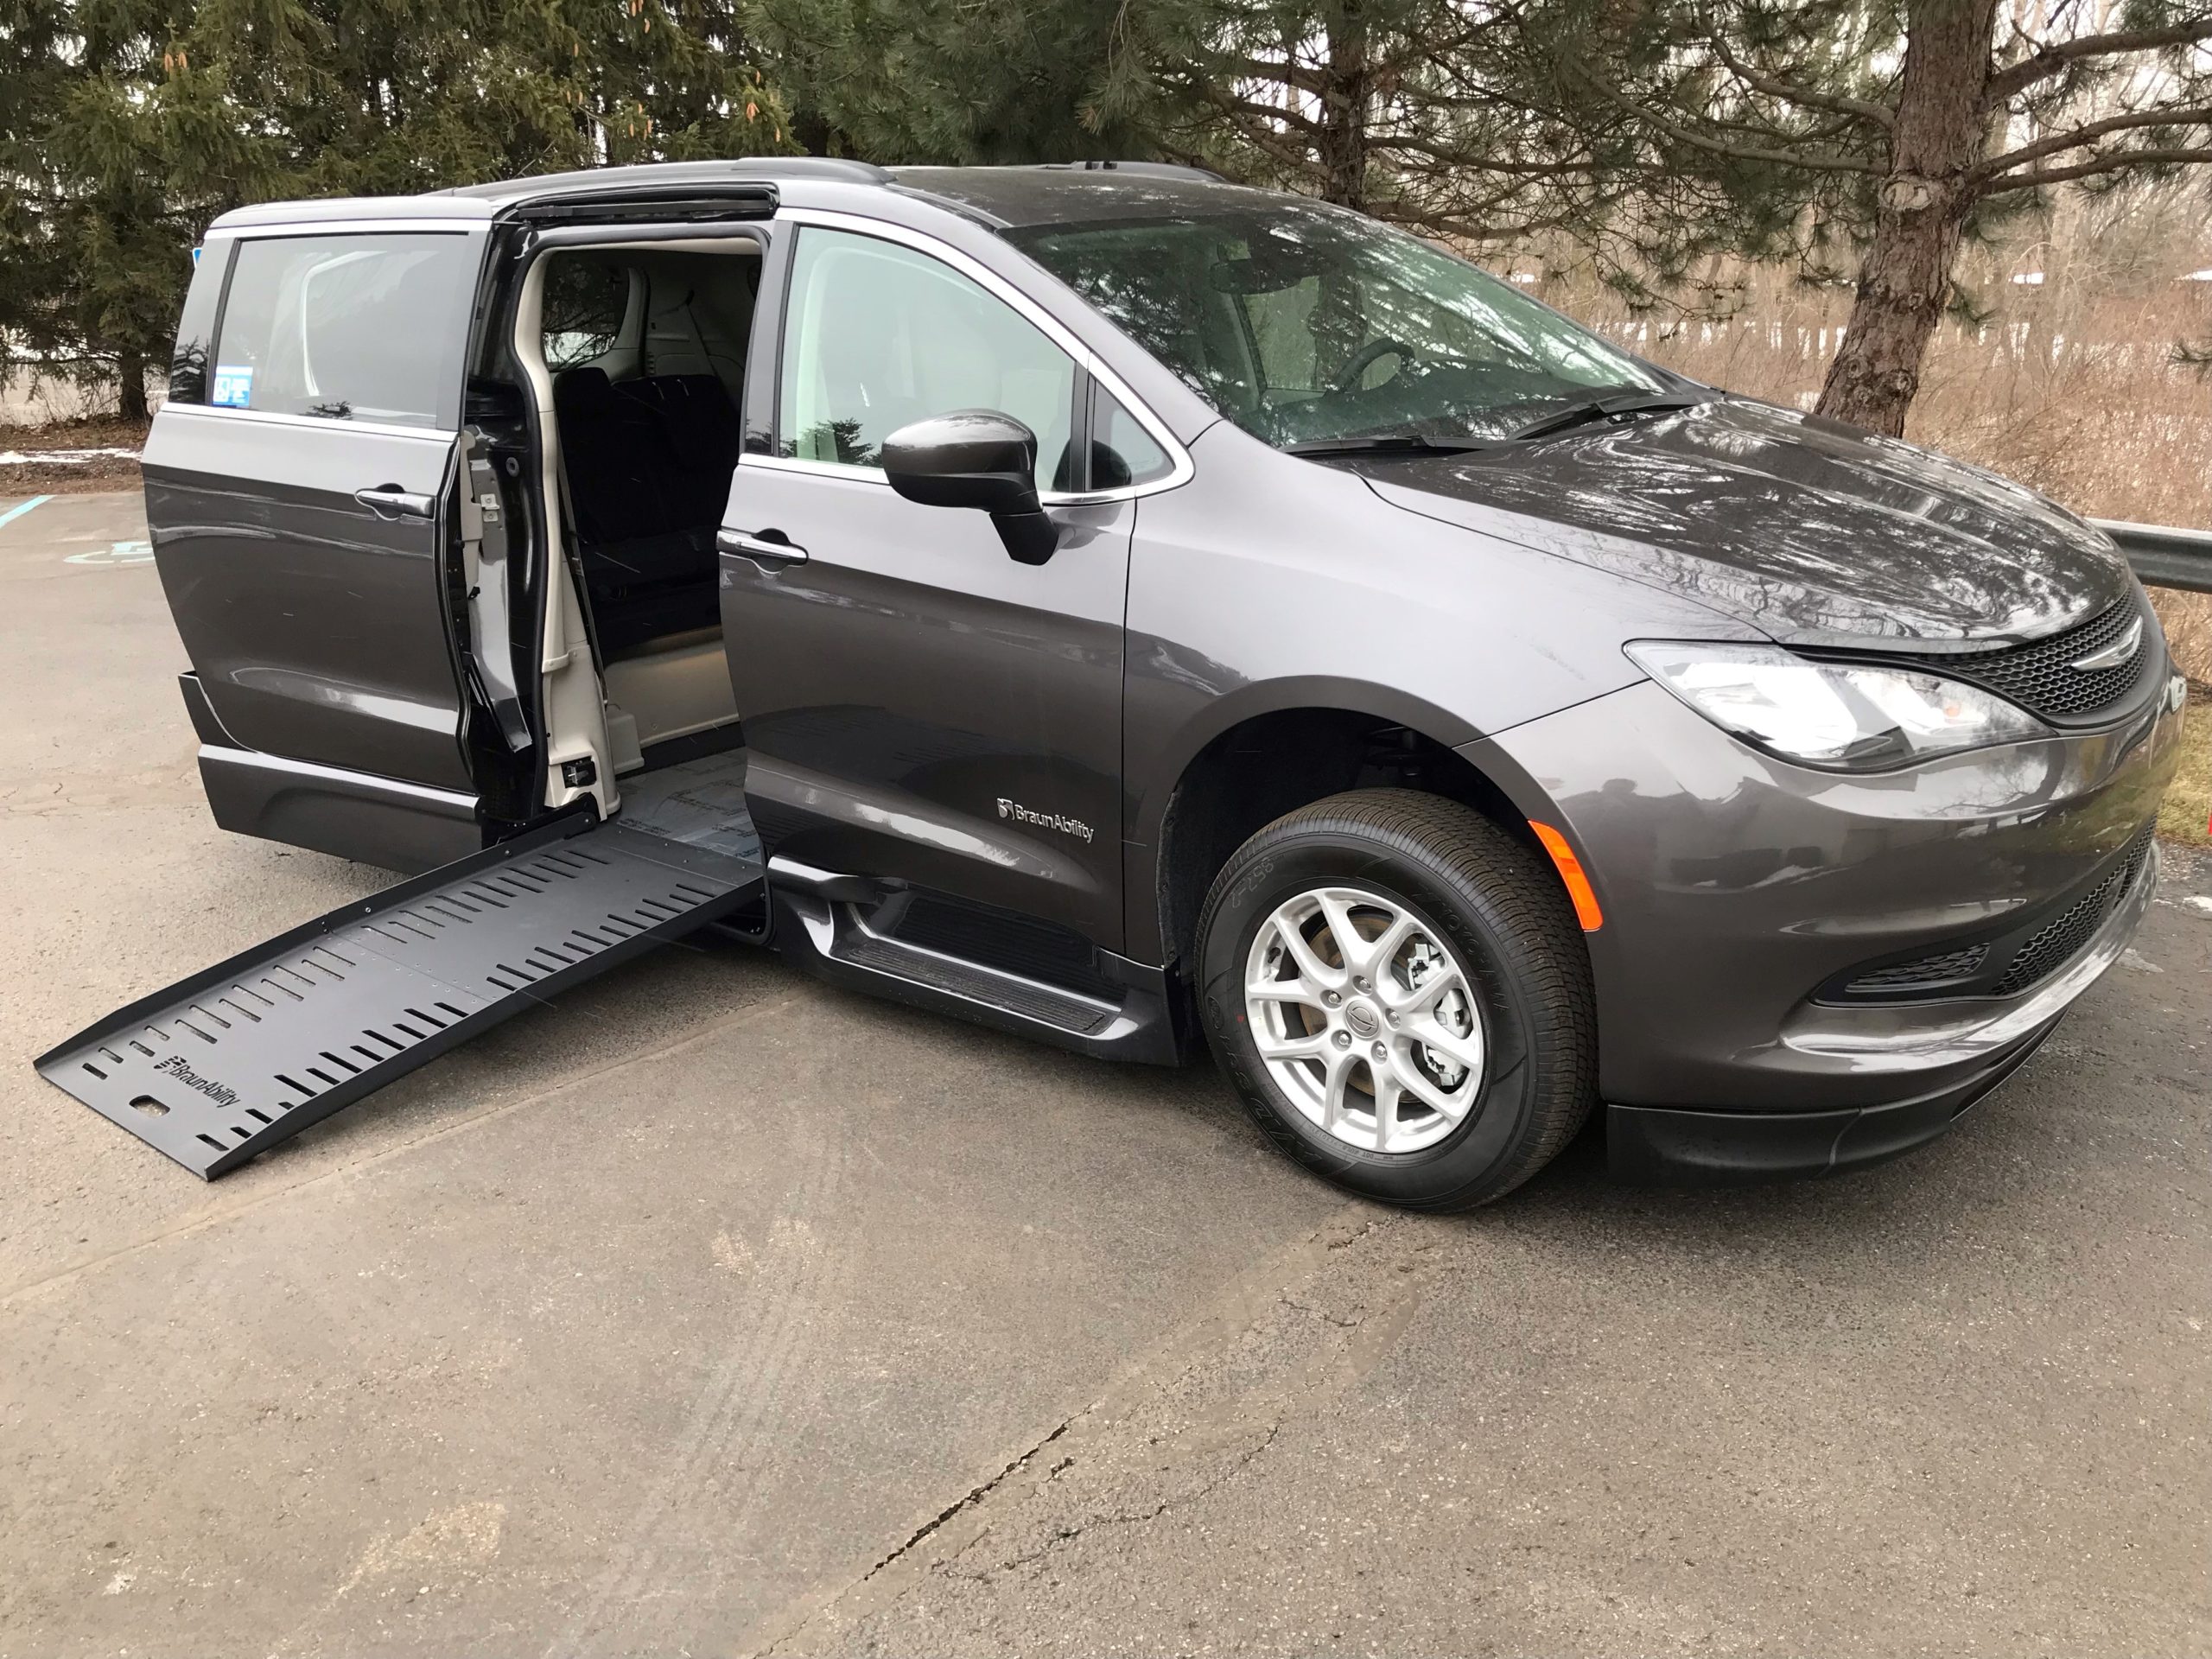 2021 Chrysler Voyager LXI Granite with Power Foldout BraunAbility XT Conversion